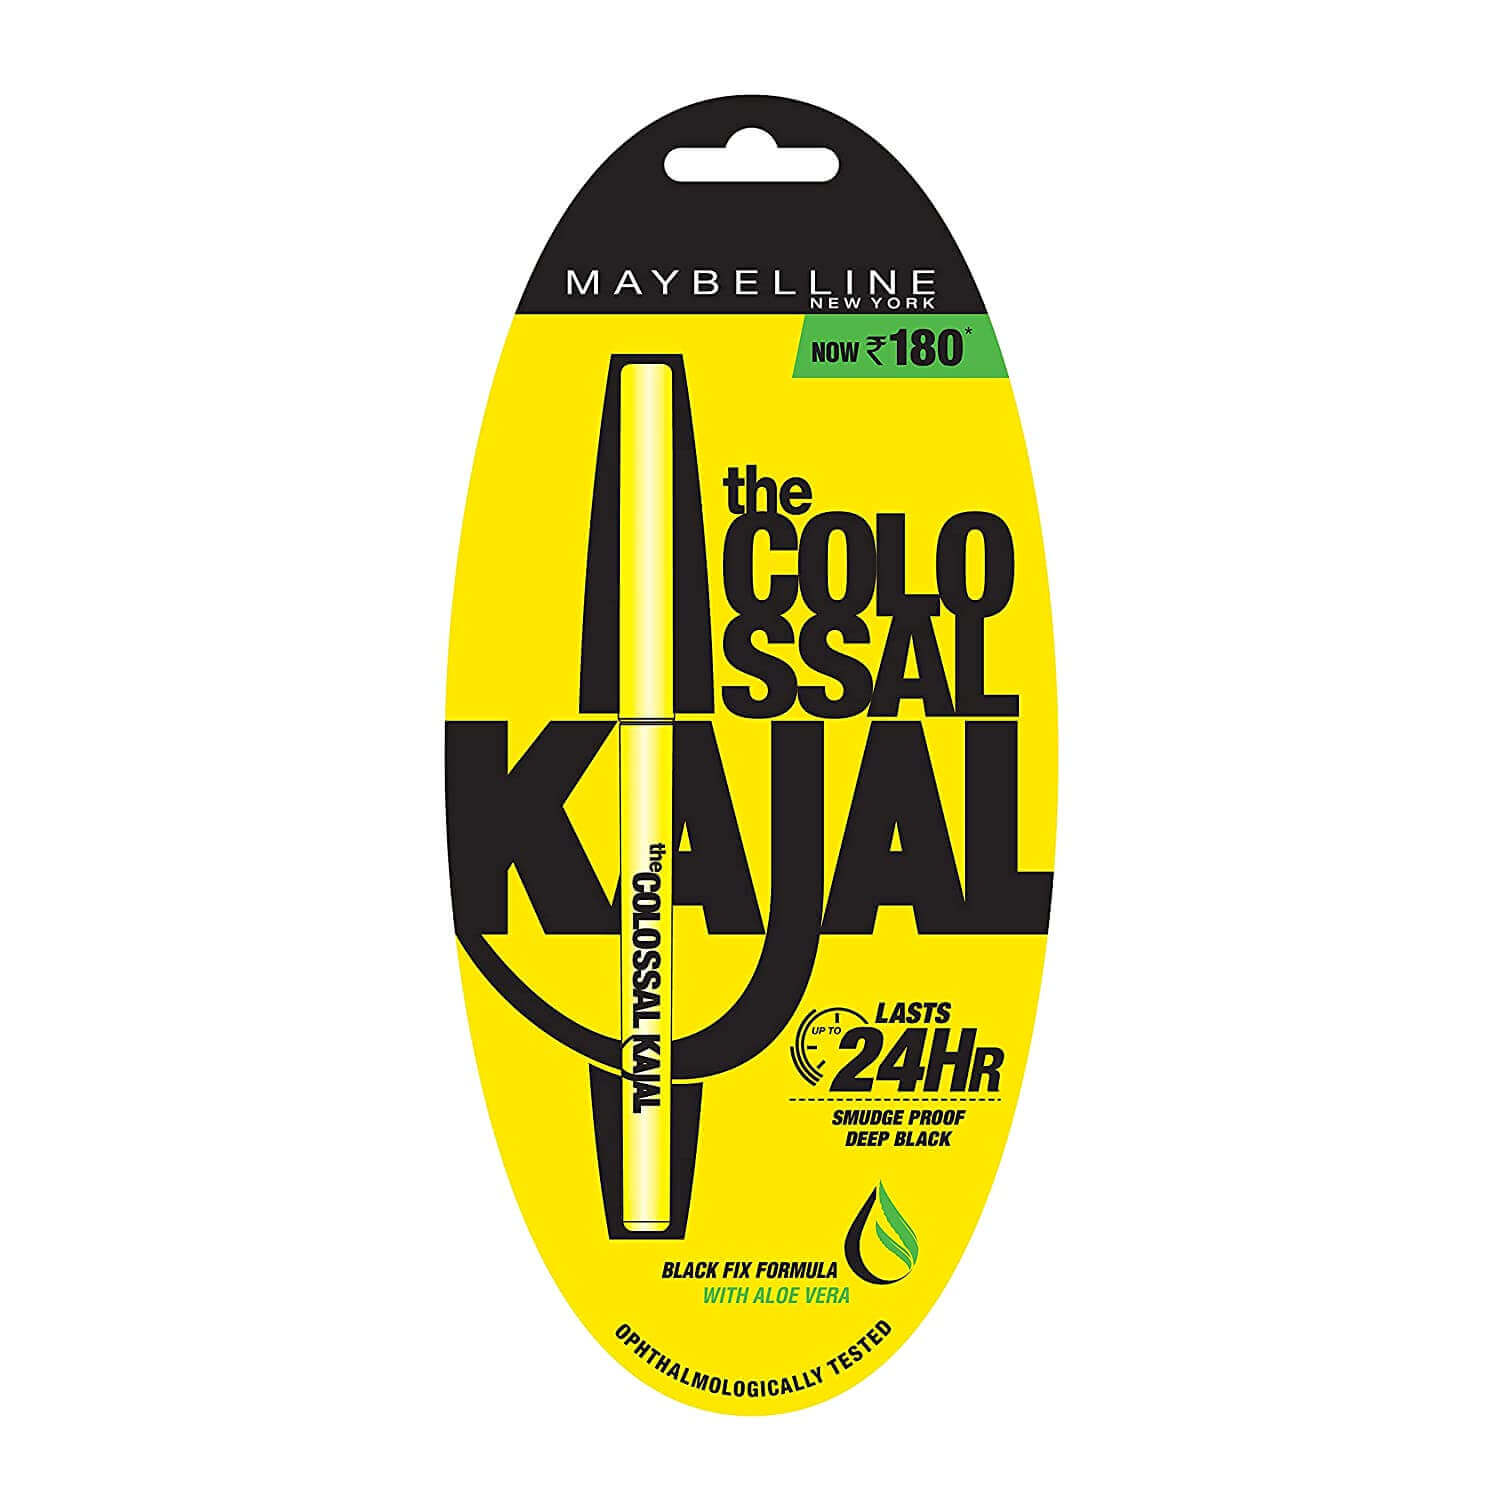 Maybelline New York Colossal Kajal Create bold, smudge-free lines with the kajal eye pencil